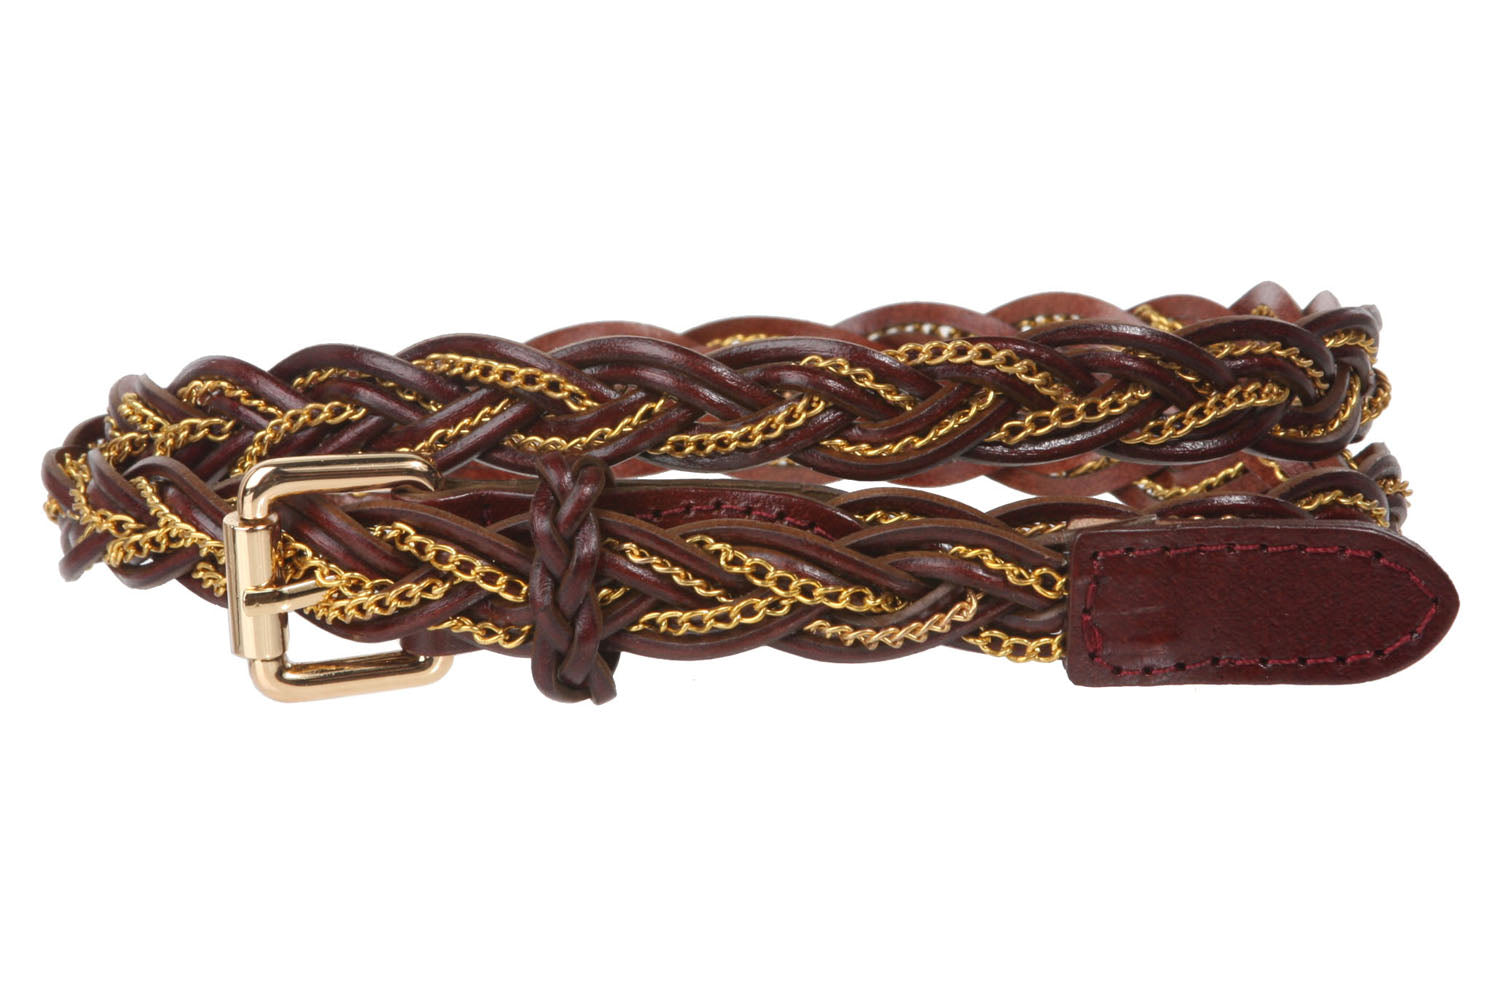 Women's 3/4" (19 mm) Skinny Braided Weave Leather Belt with Chain Detail